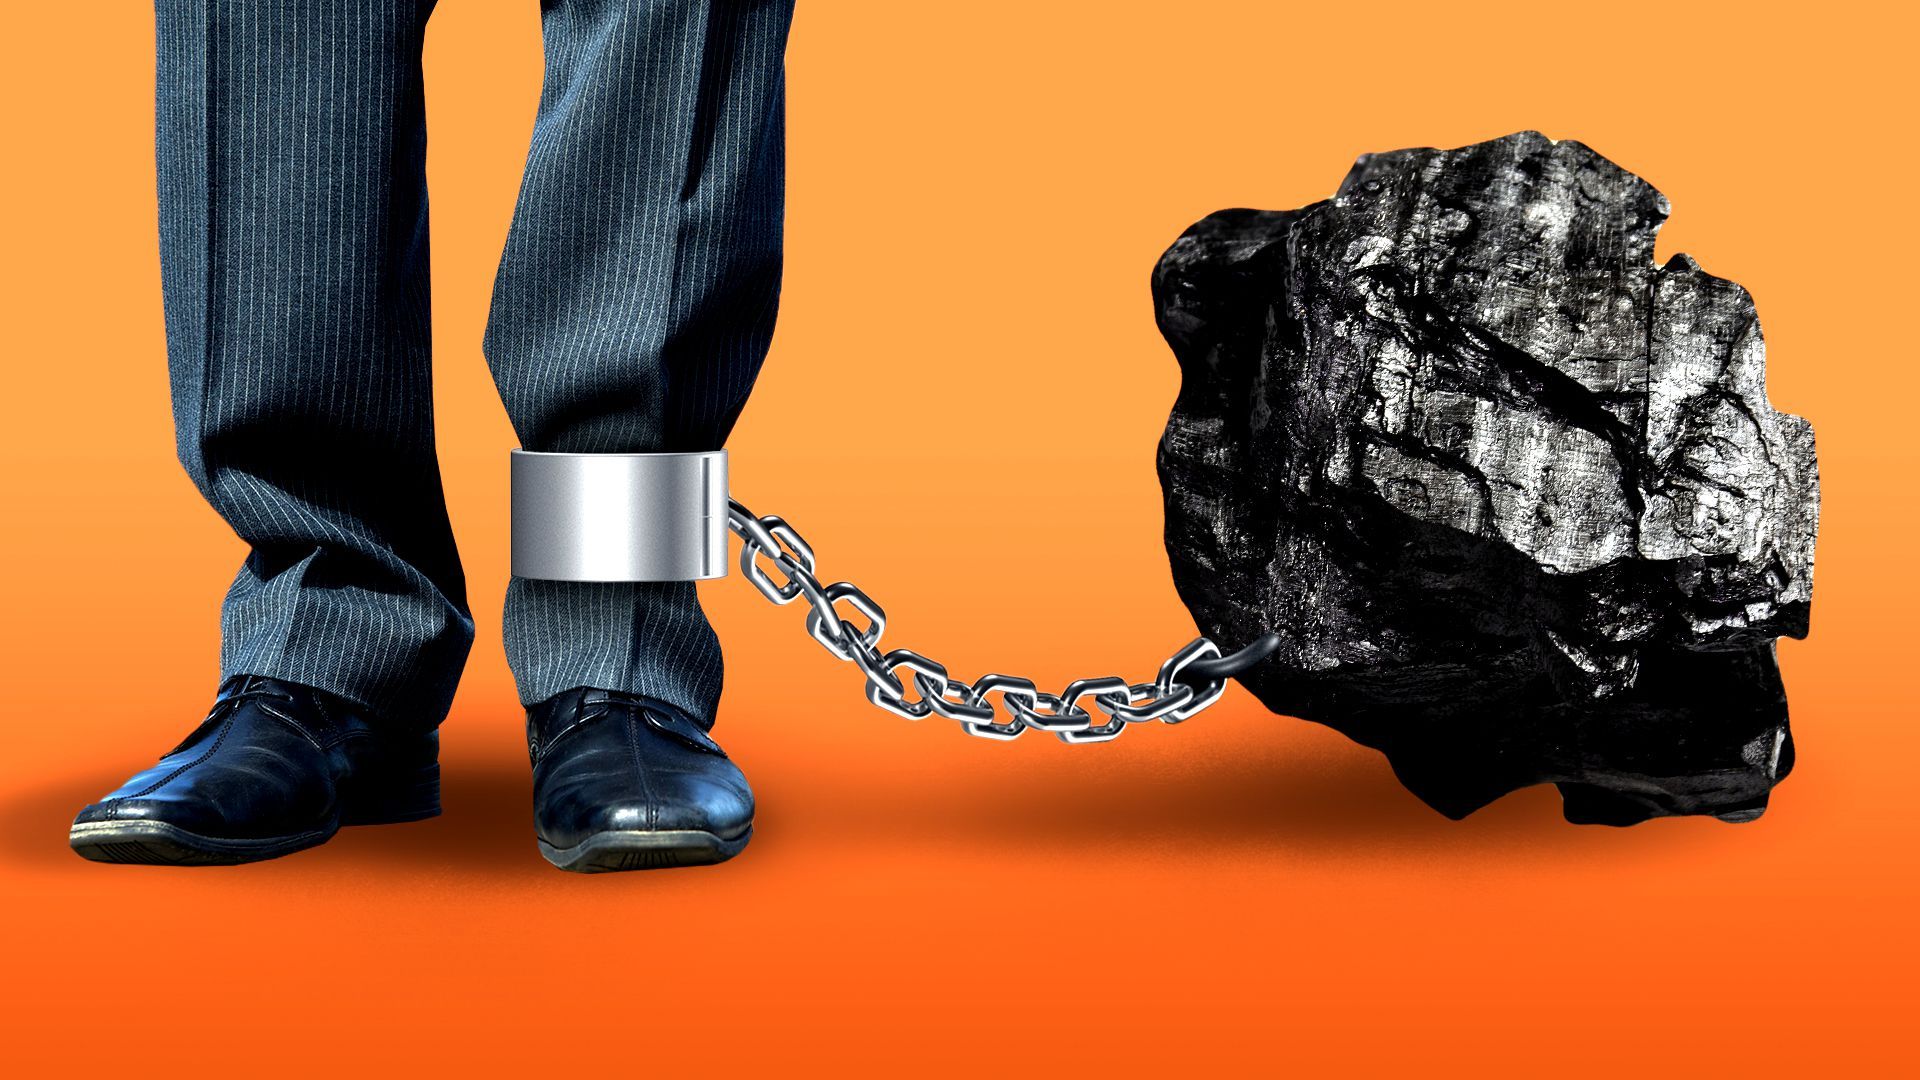 Illustration of a business person's feet shackled to a large piece of coal